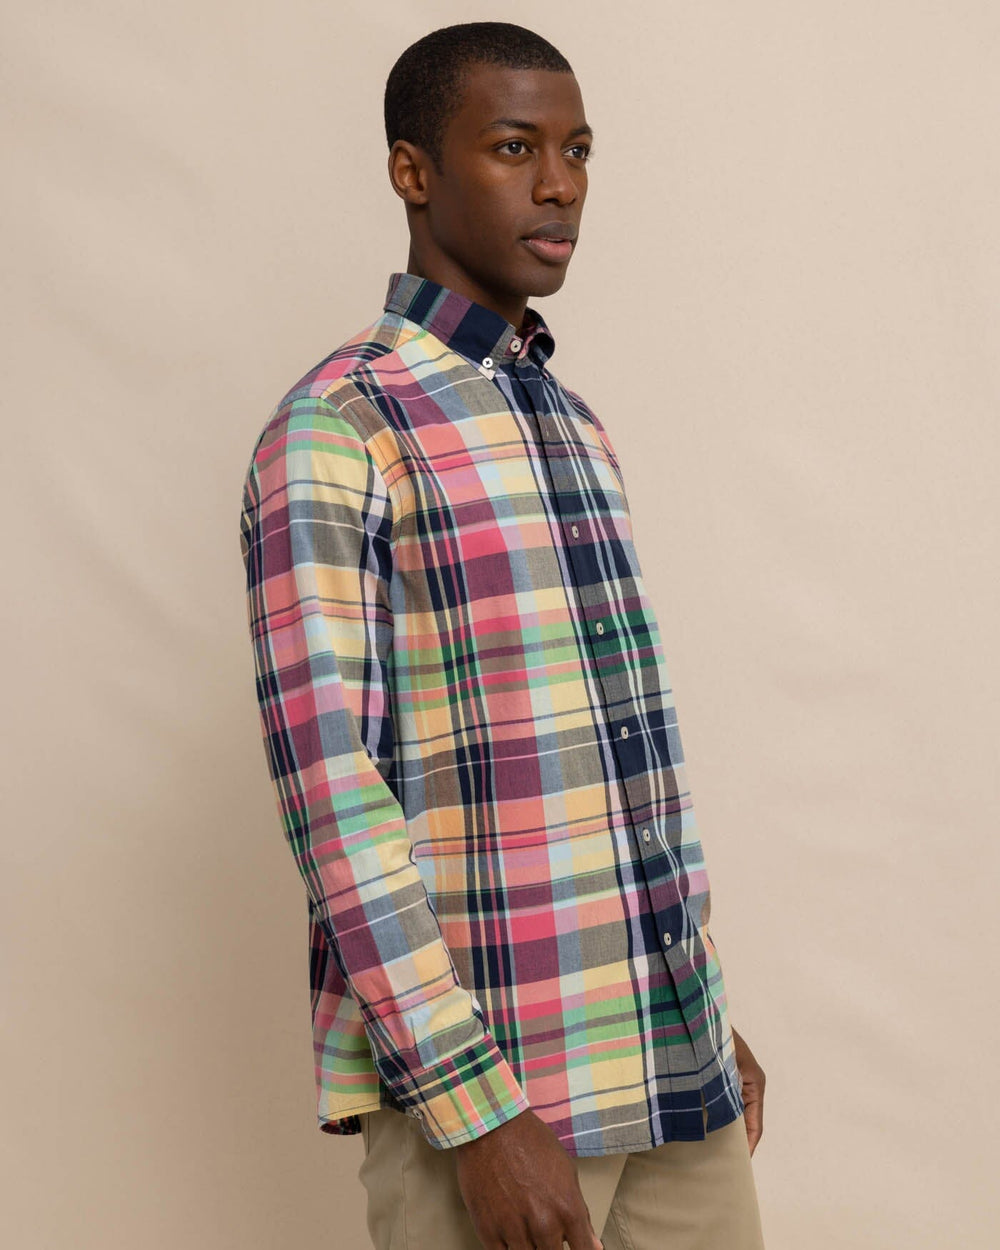 The front view of the Southern Tide Harkers Island Madras Plaid Long Sleeve Sport Shirt by Southern Tide - Dress Blue